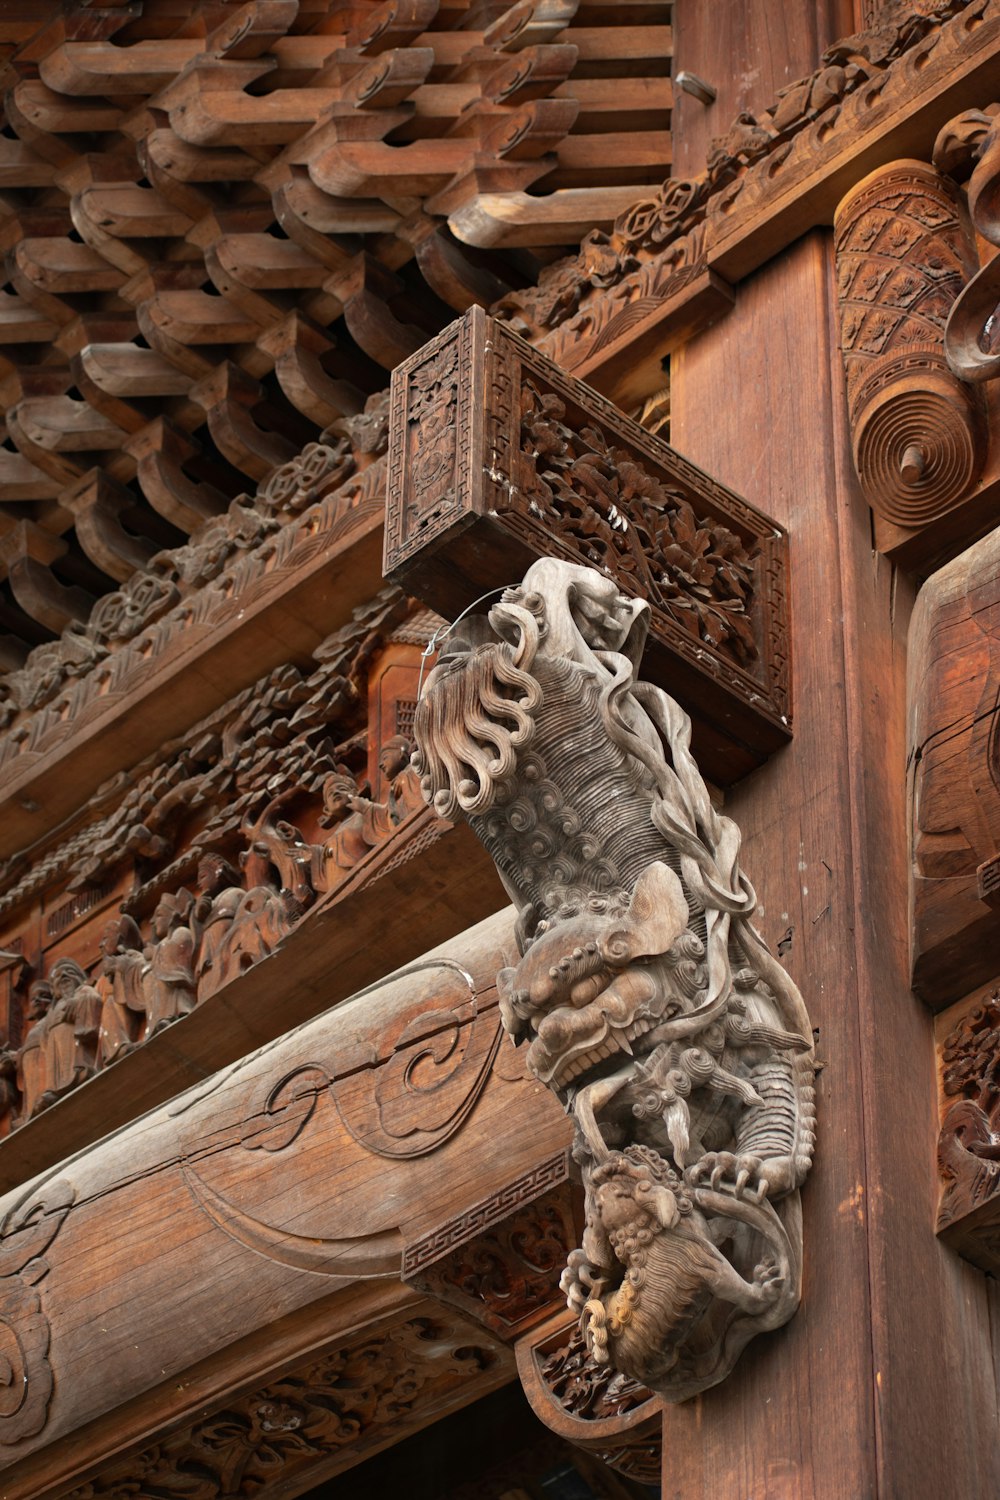 a wooden carving of a horse on the side of a building